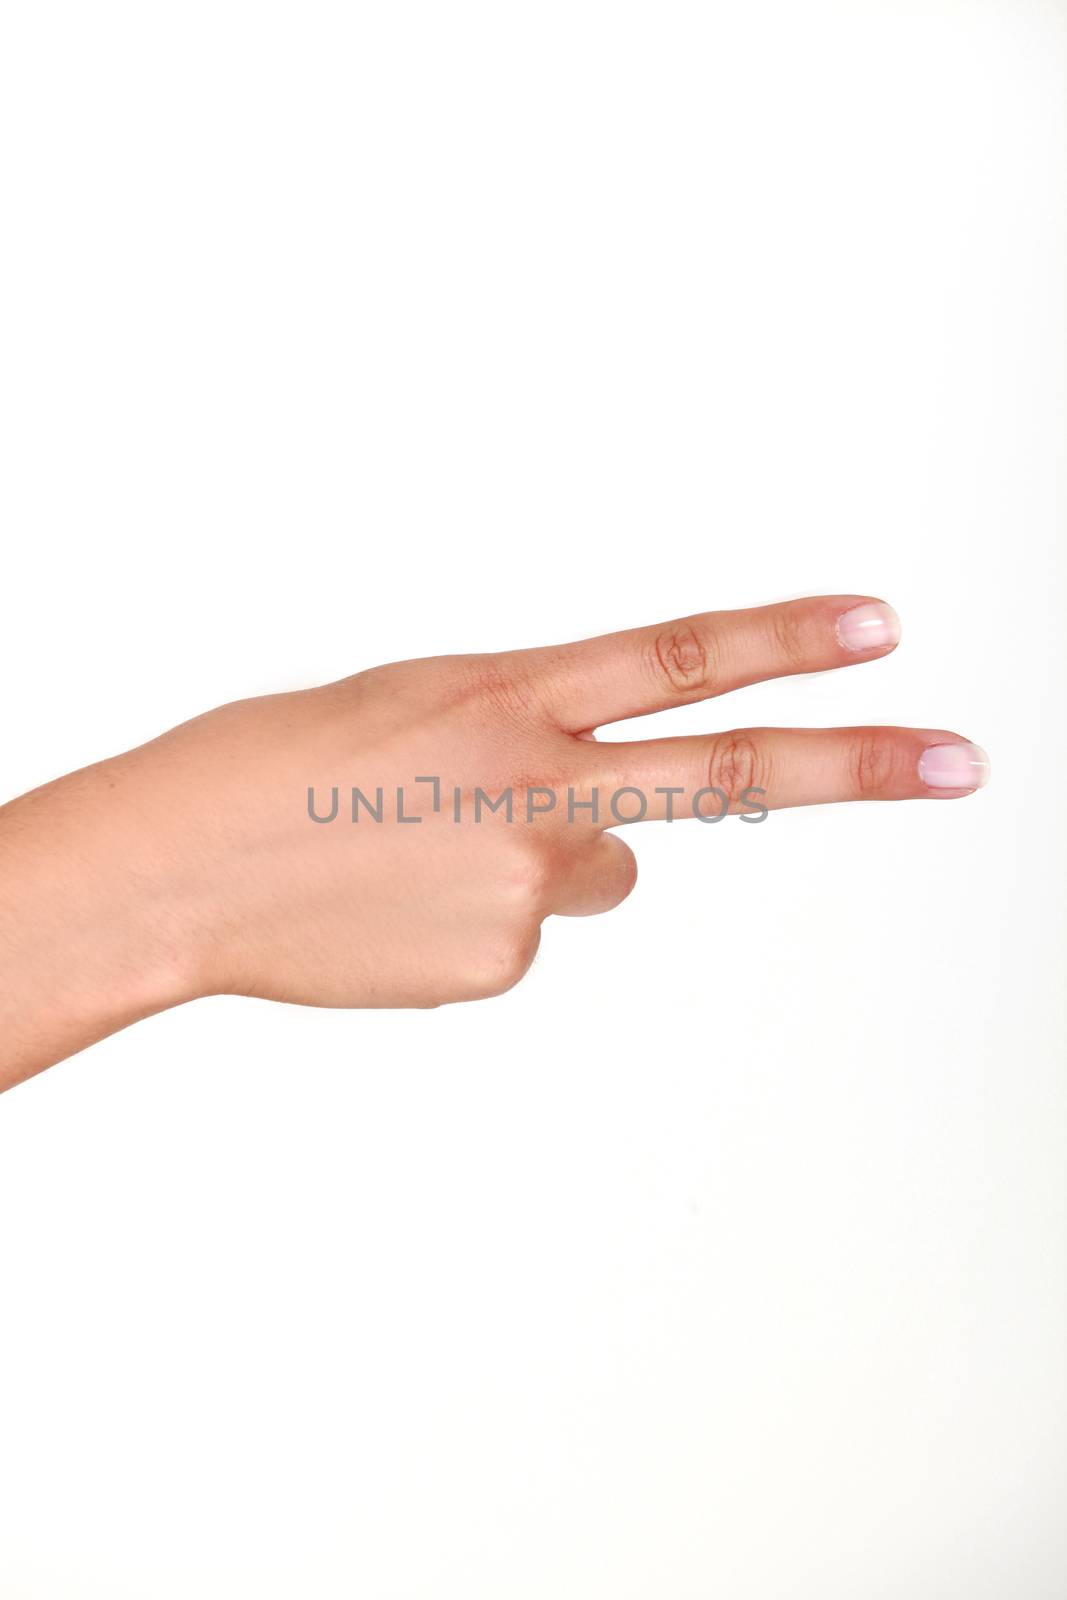 Human hand holding up two fingers